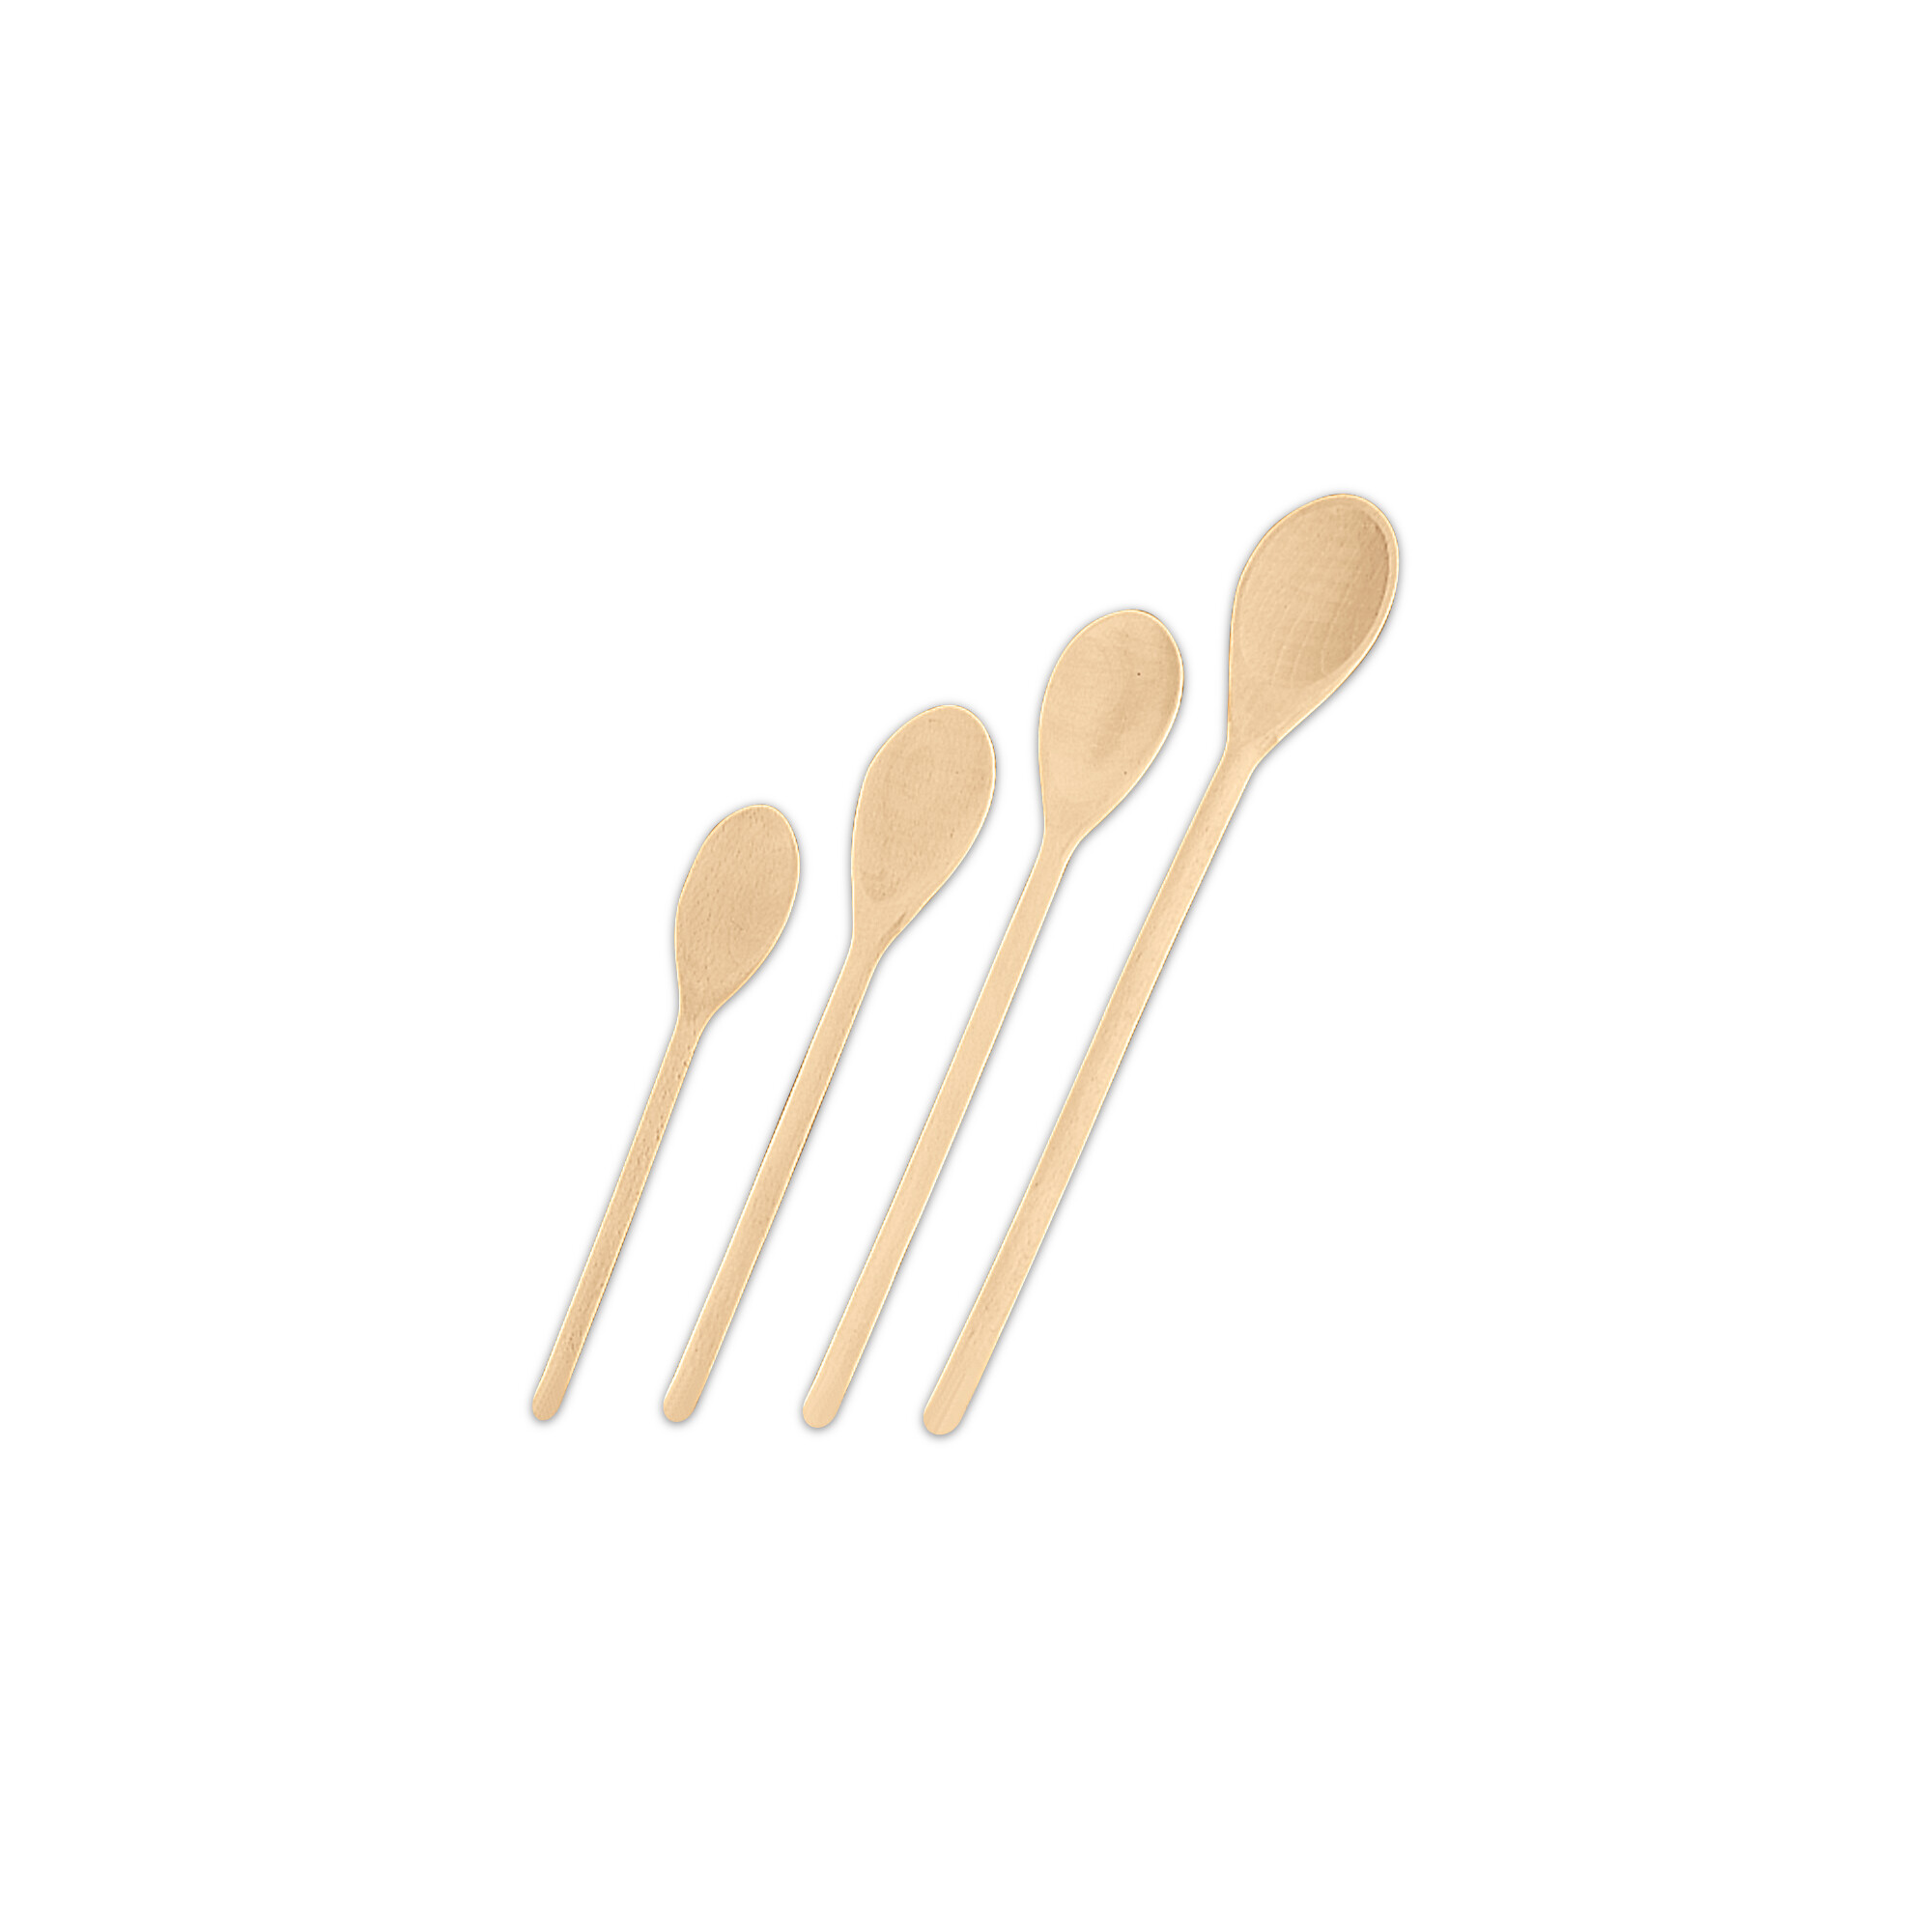 Cooking spoon – Oval